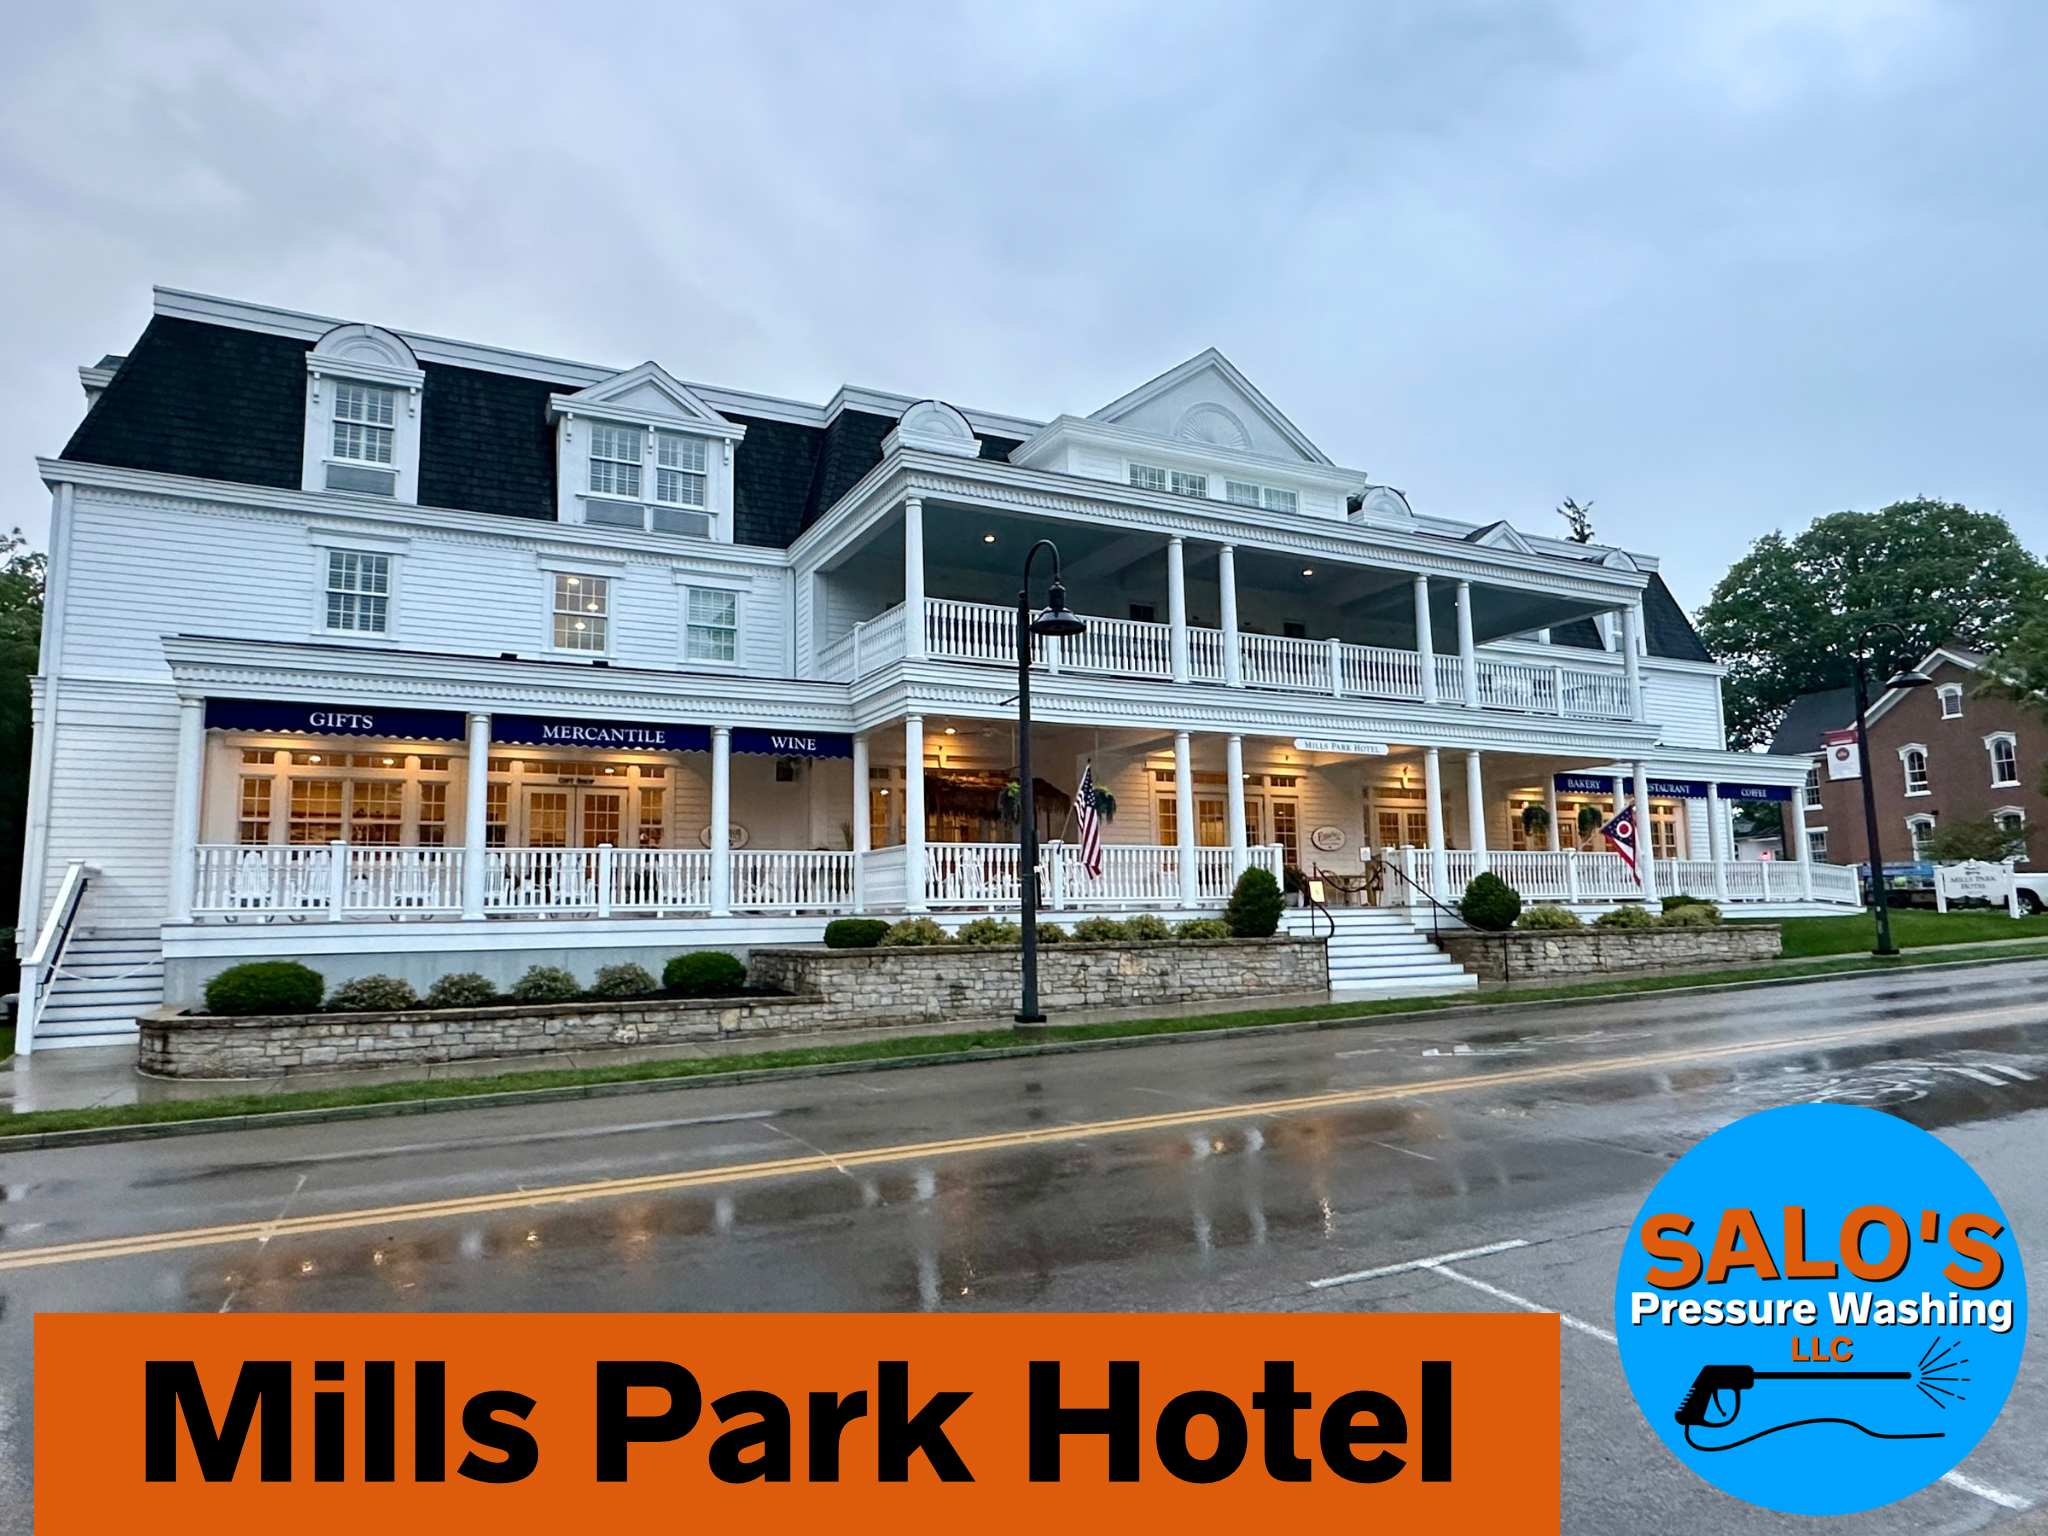 Commercial Pressure Washing at Mills Park Hotel in Yellow Springs, Oh